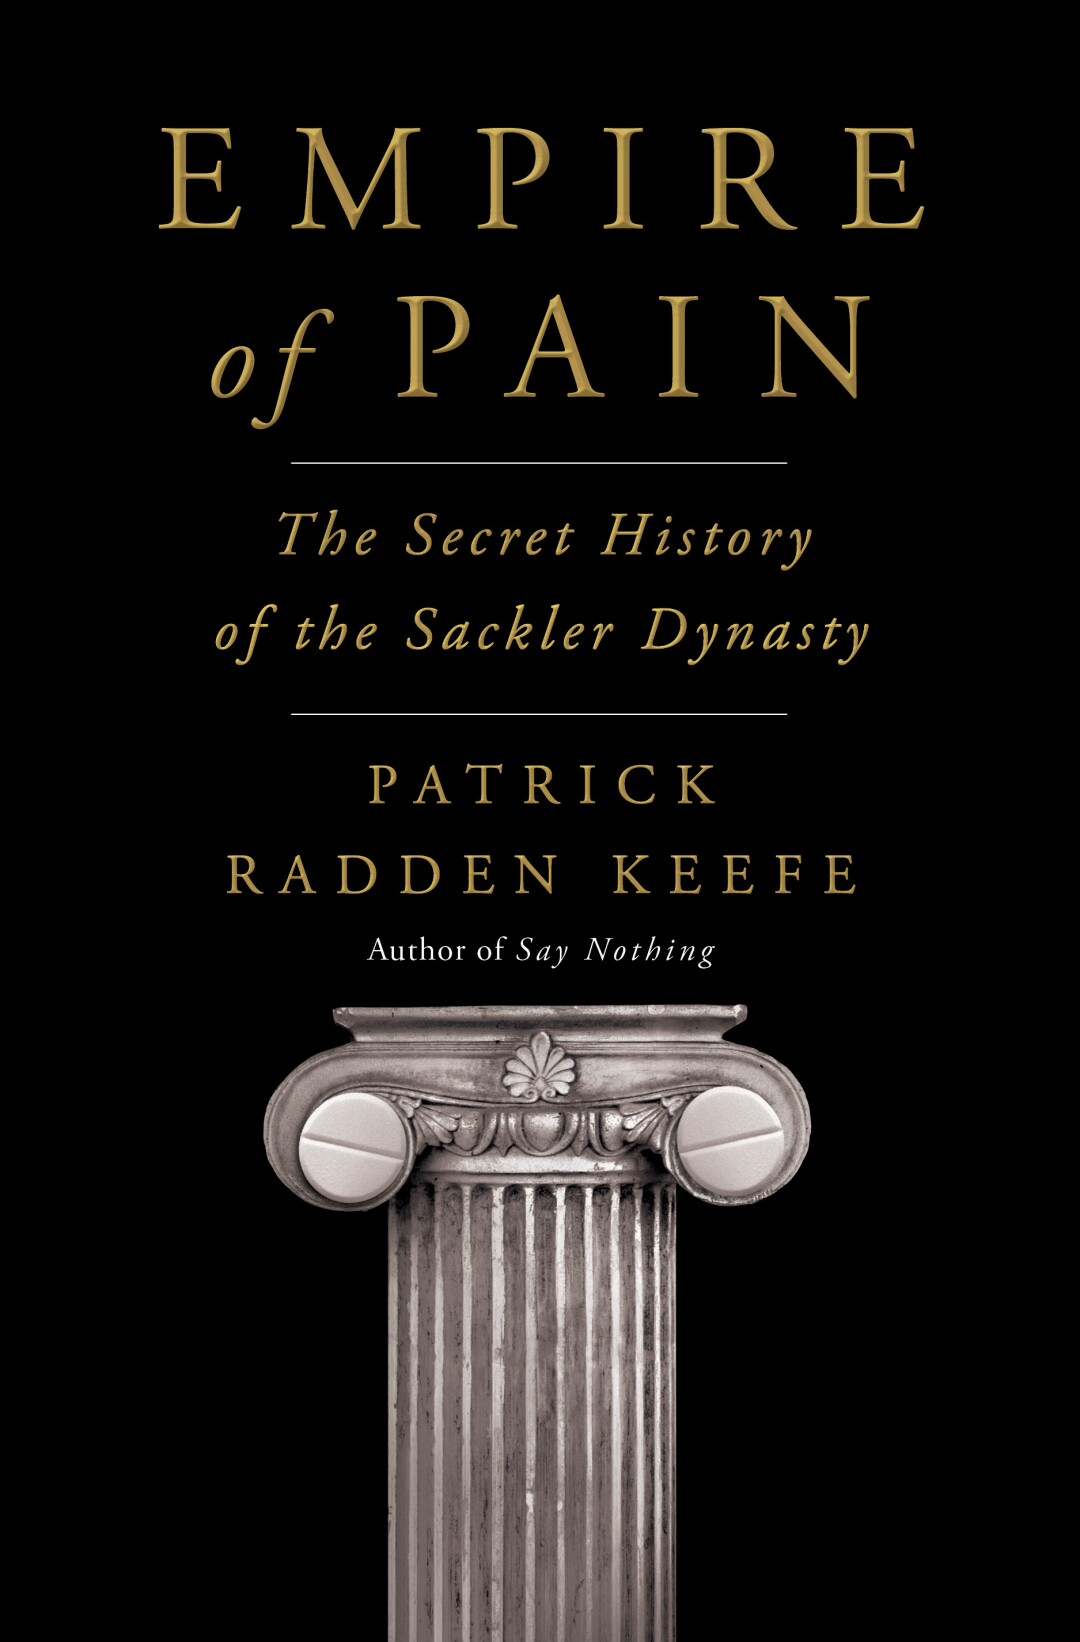 A pillar pictured on the cover of "Empire of Pain," by Patrick Radden Keefe.